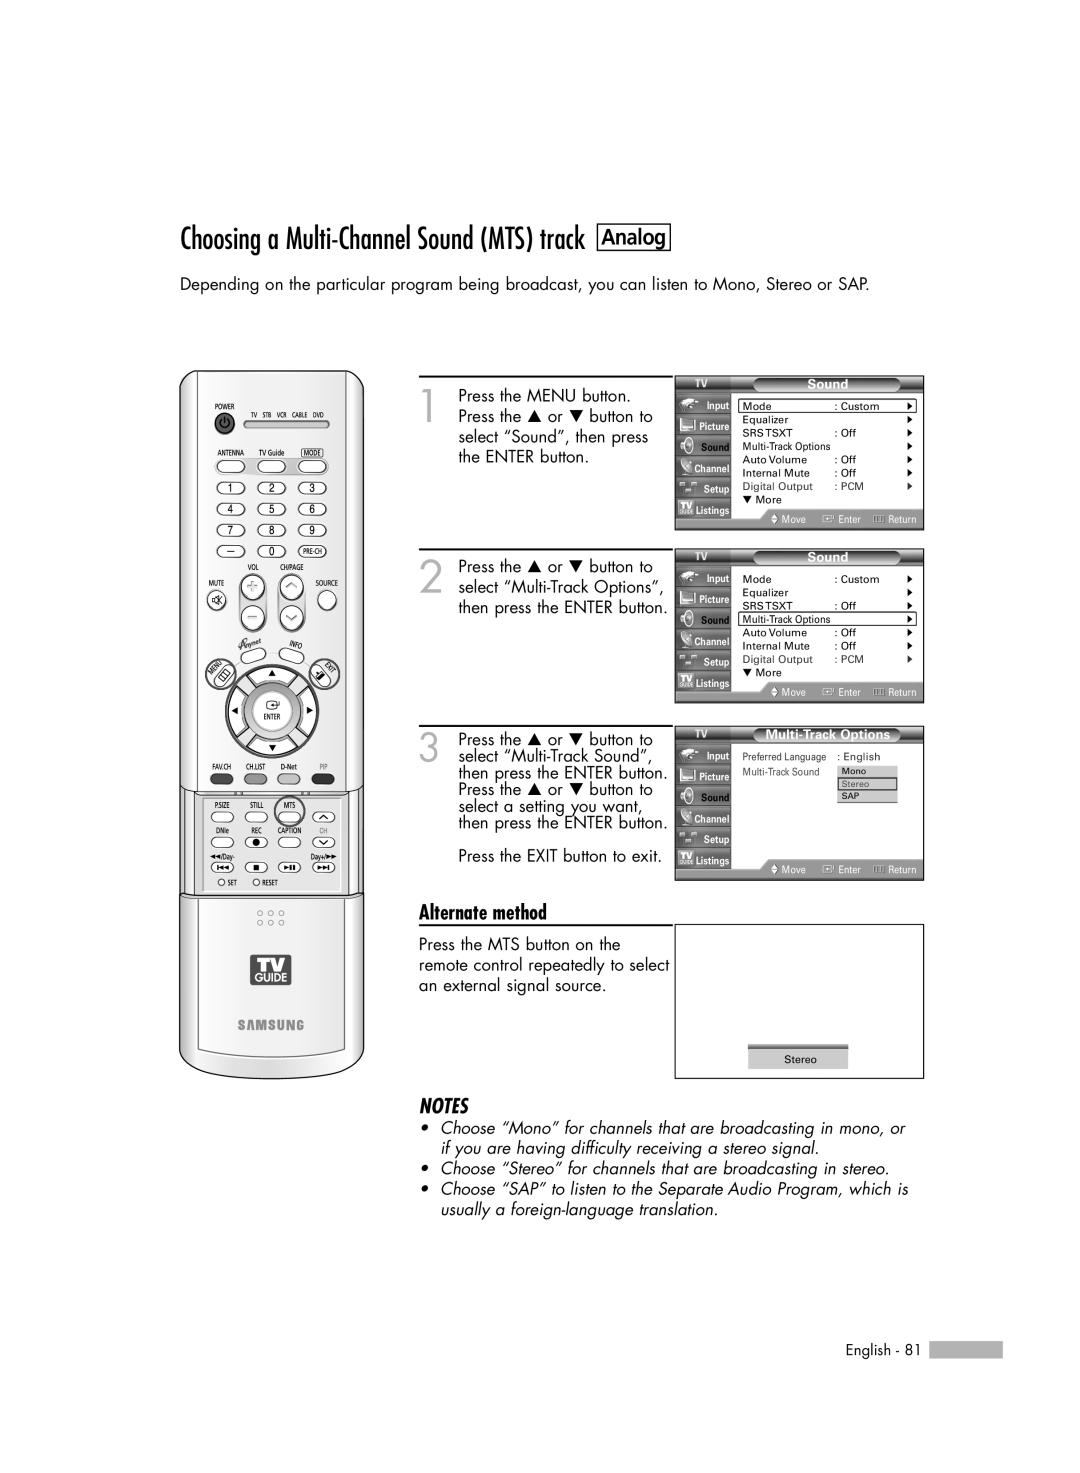 Samsung HL-R6178W Analog, Choosing a Multi-ChannelSound MTS track, Alternate method, Notes, Press the EXIT button to exit 